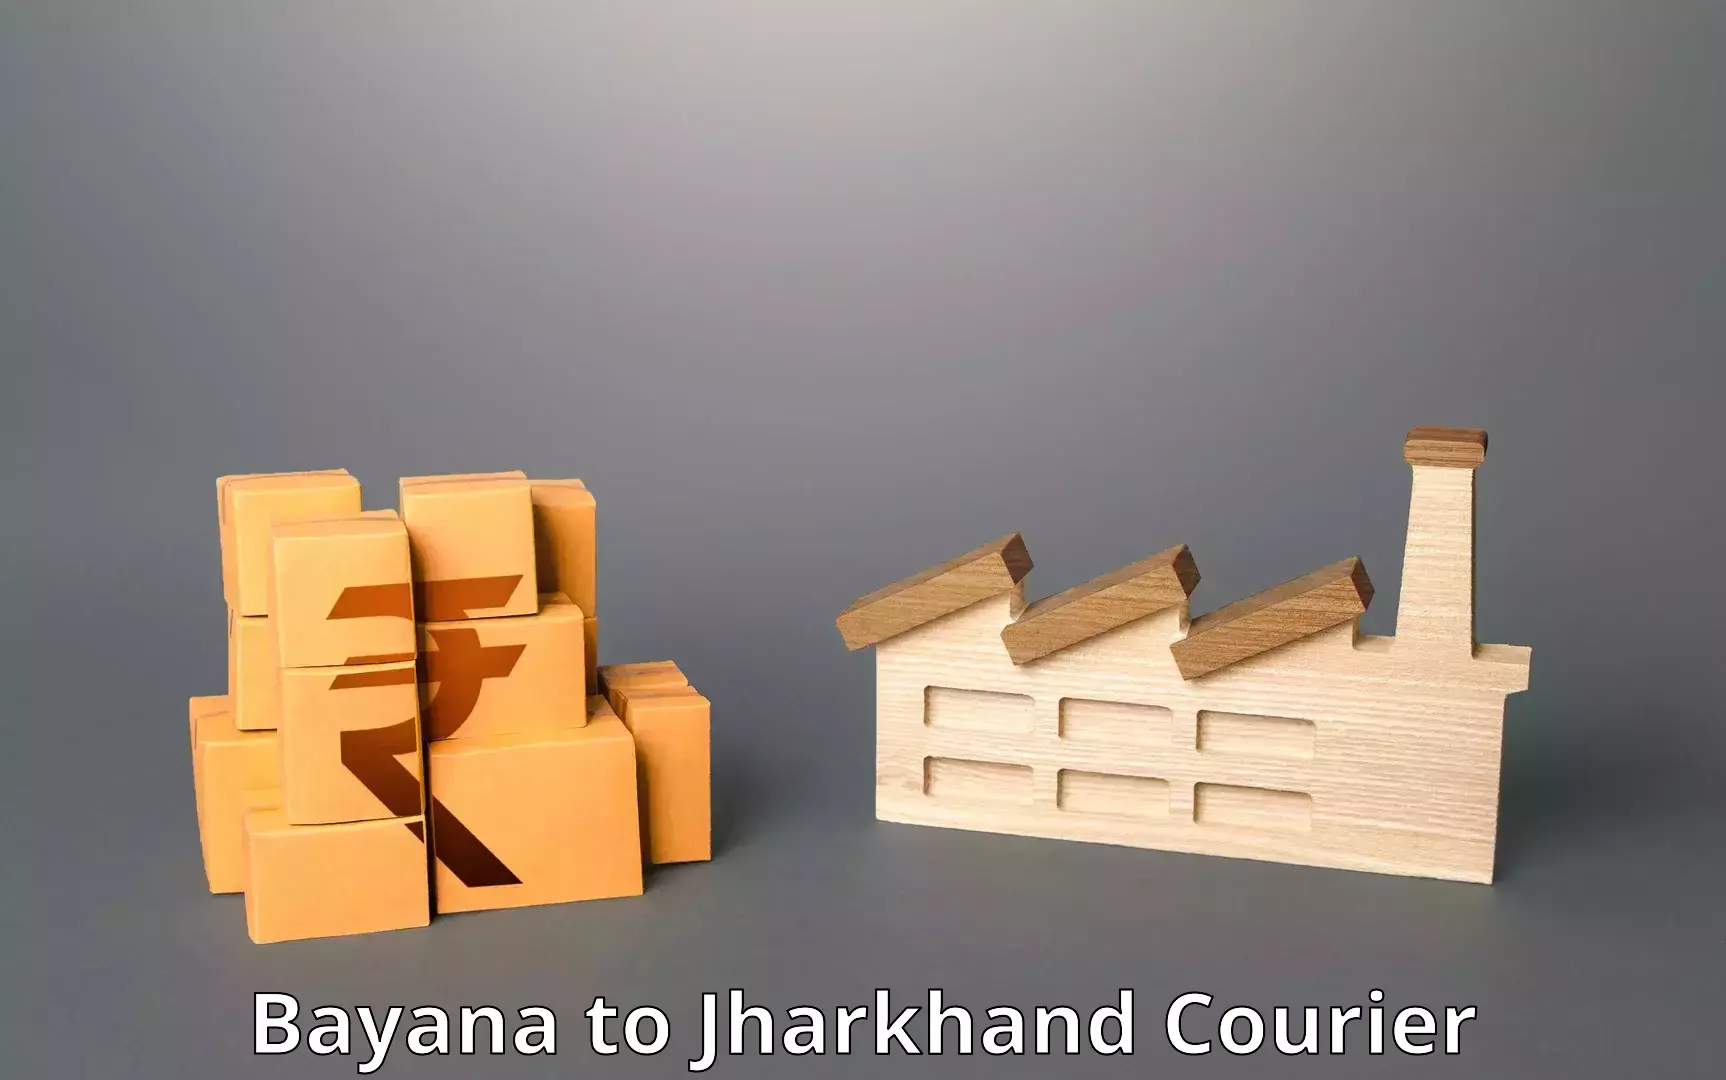 Same-day delivery solutions Bayana to Jharkhand